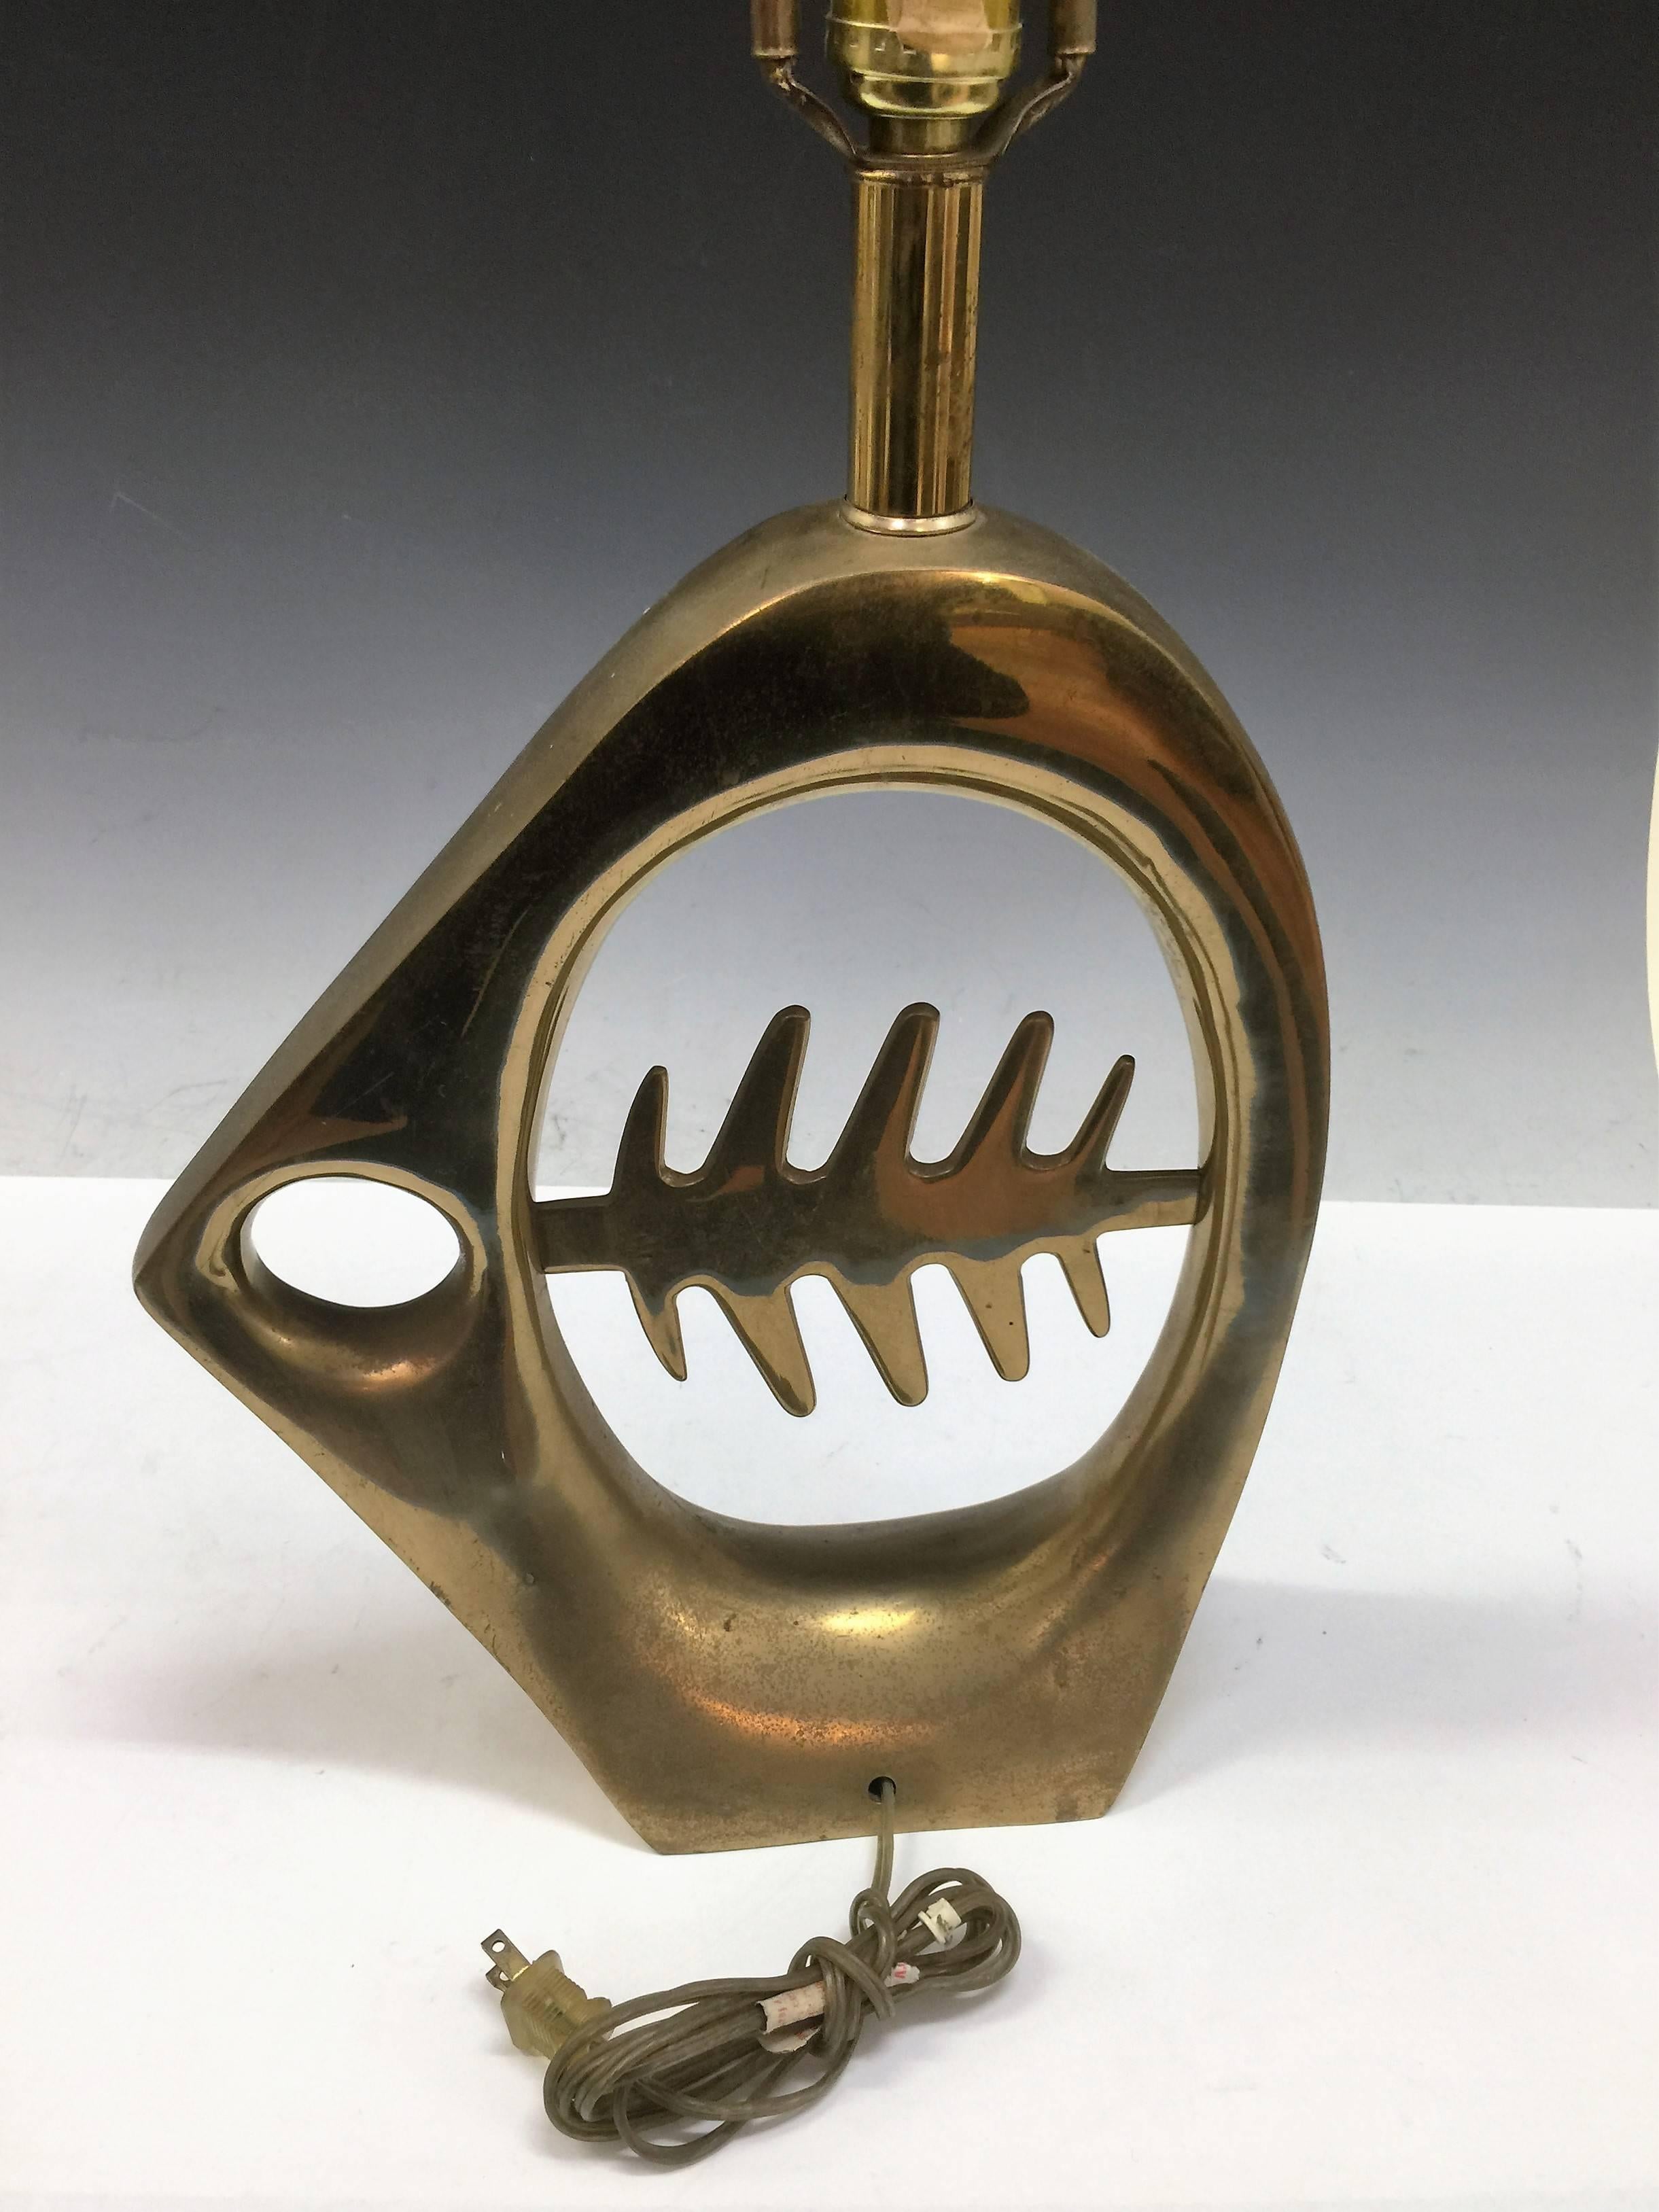 Really cool sculptural brass X-ray fish lamp with exaggerated bones inside body. Great masterful design. Perfect accent lamp that is both functional and a great sculpture as well. The measurement of the fish body alone is 14